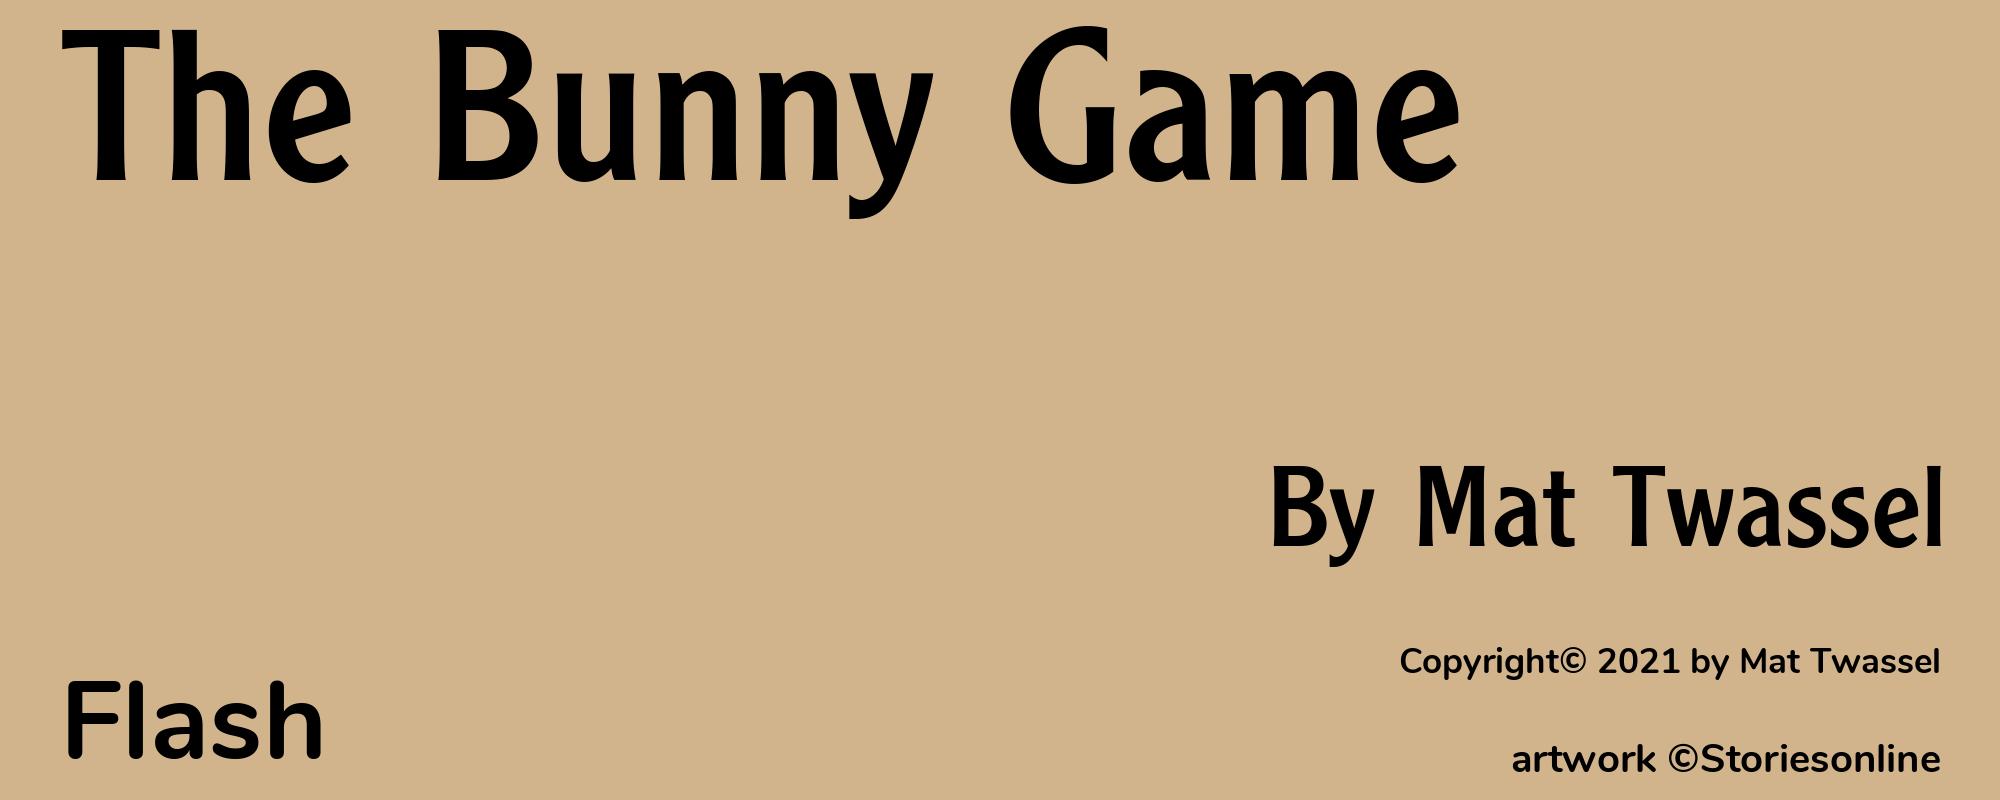 The Bunny Game - Cover